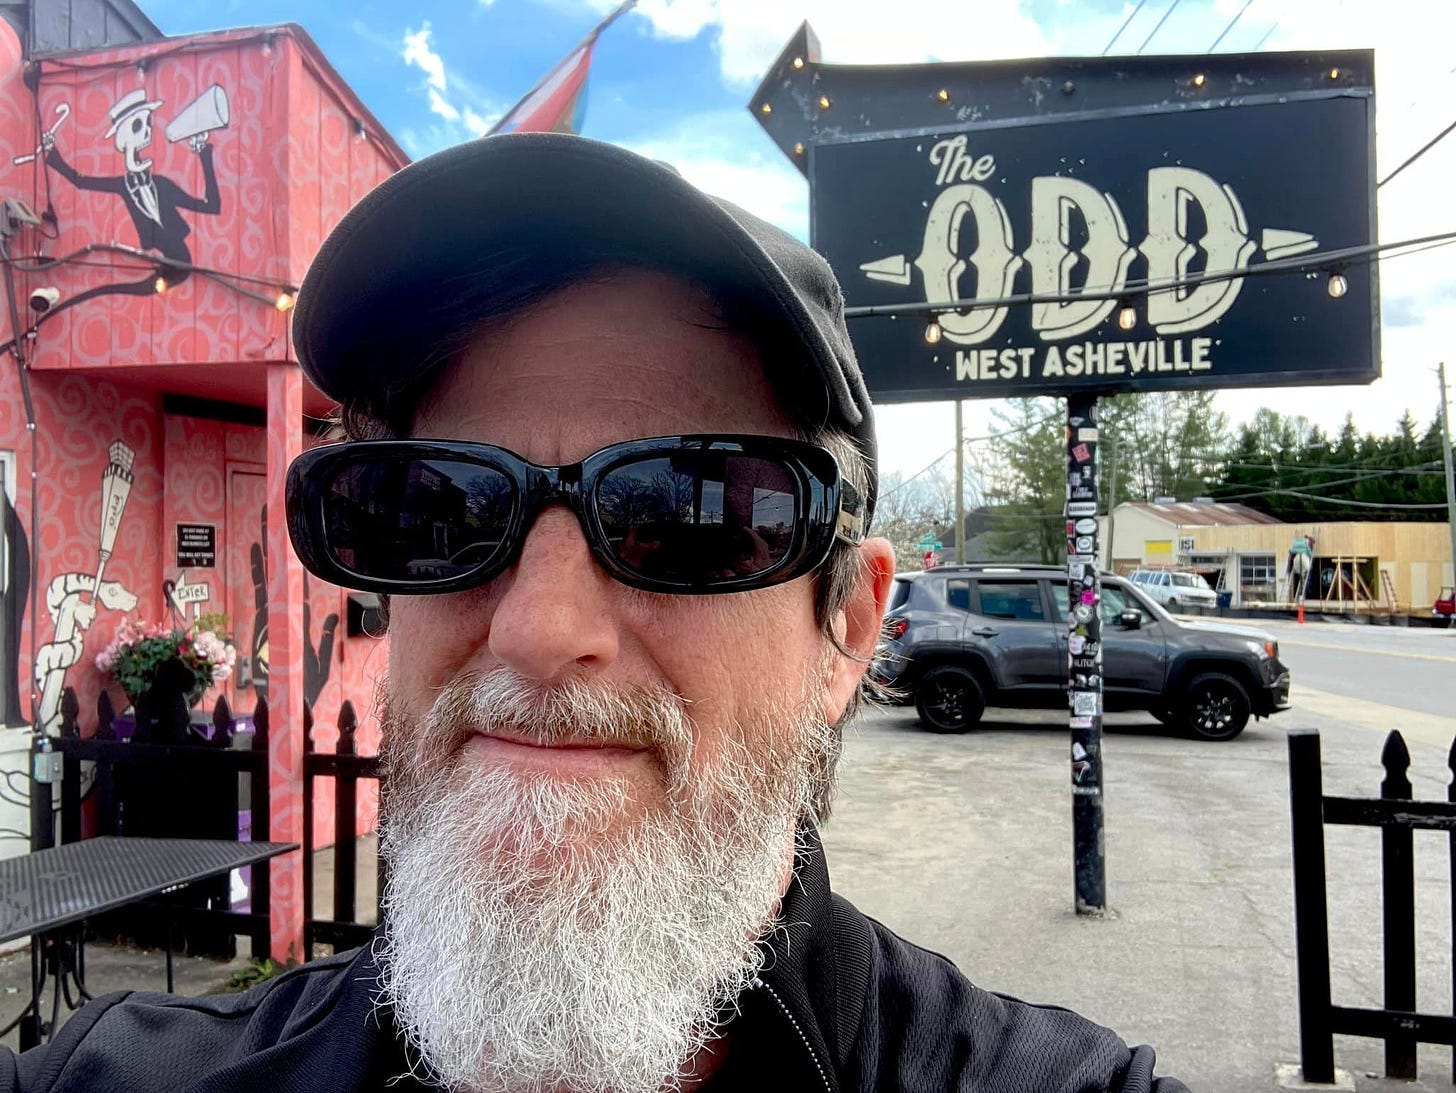 May be an image of 1 person, beard, outdoors and text that says 'The 0D.D WEST ASHEVILLE'